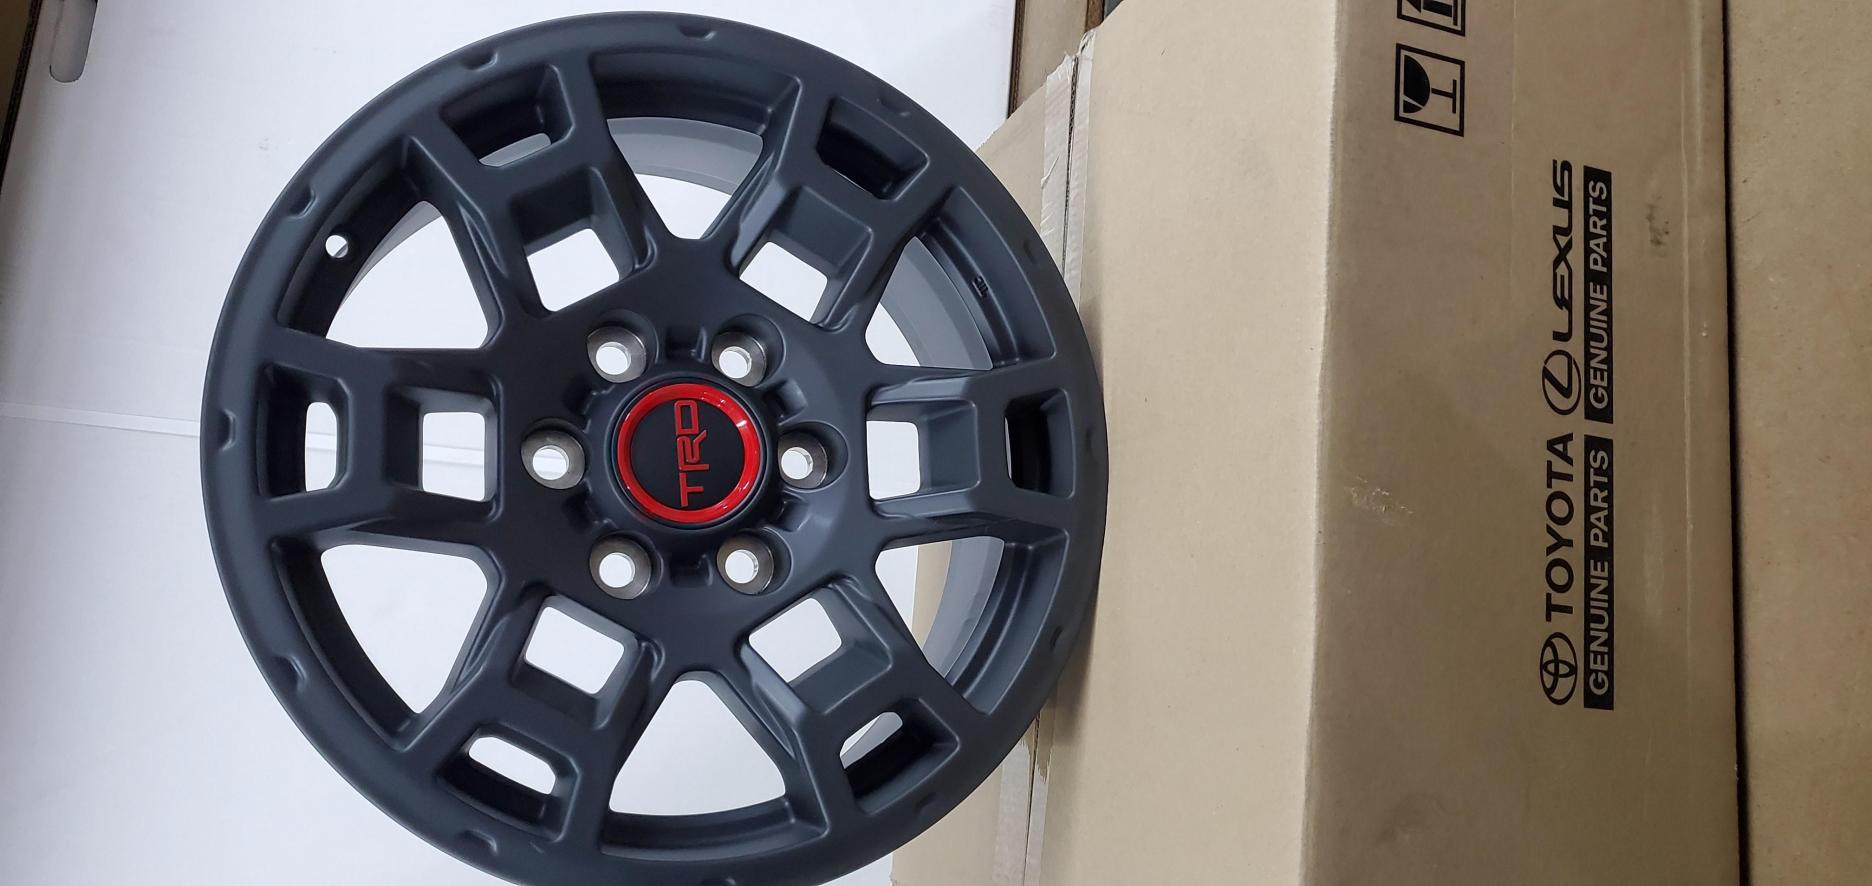 Pictures of the new 2021 trd pro wheels-4-jpg